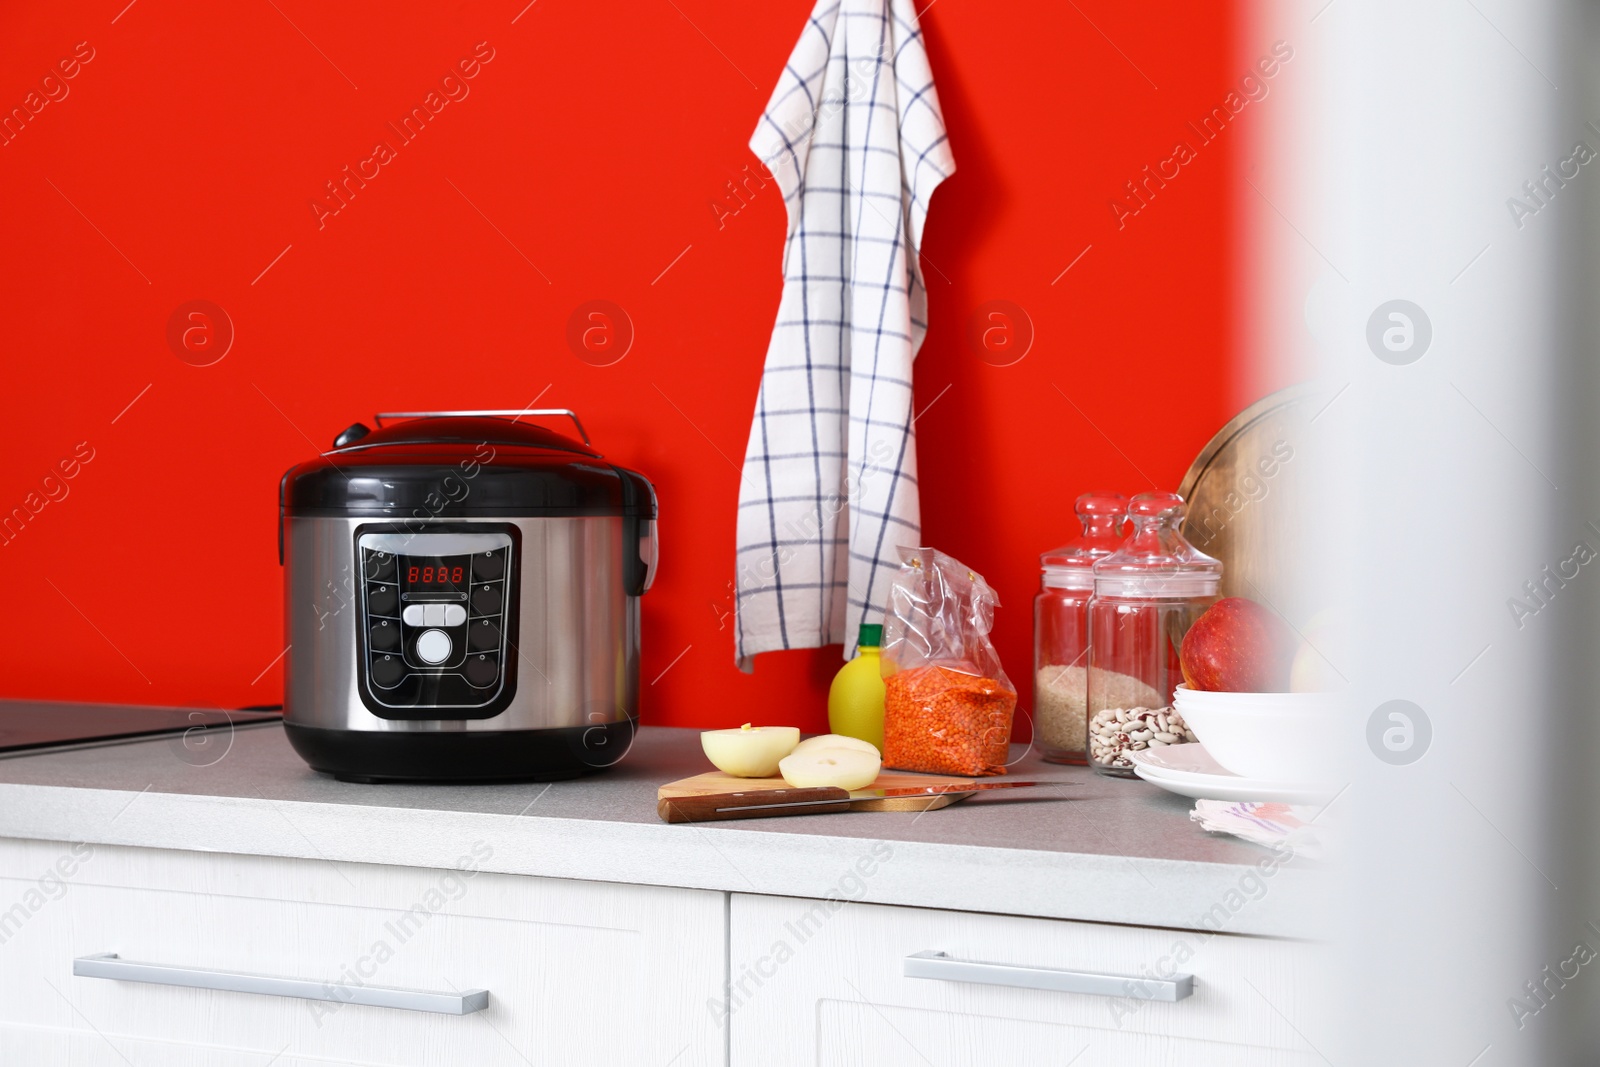 Photo of New modern multi cooker and products on table in kitchen